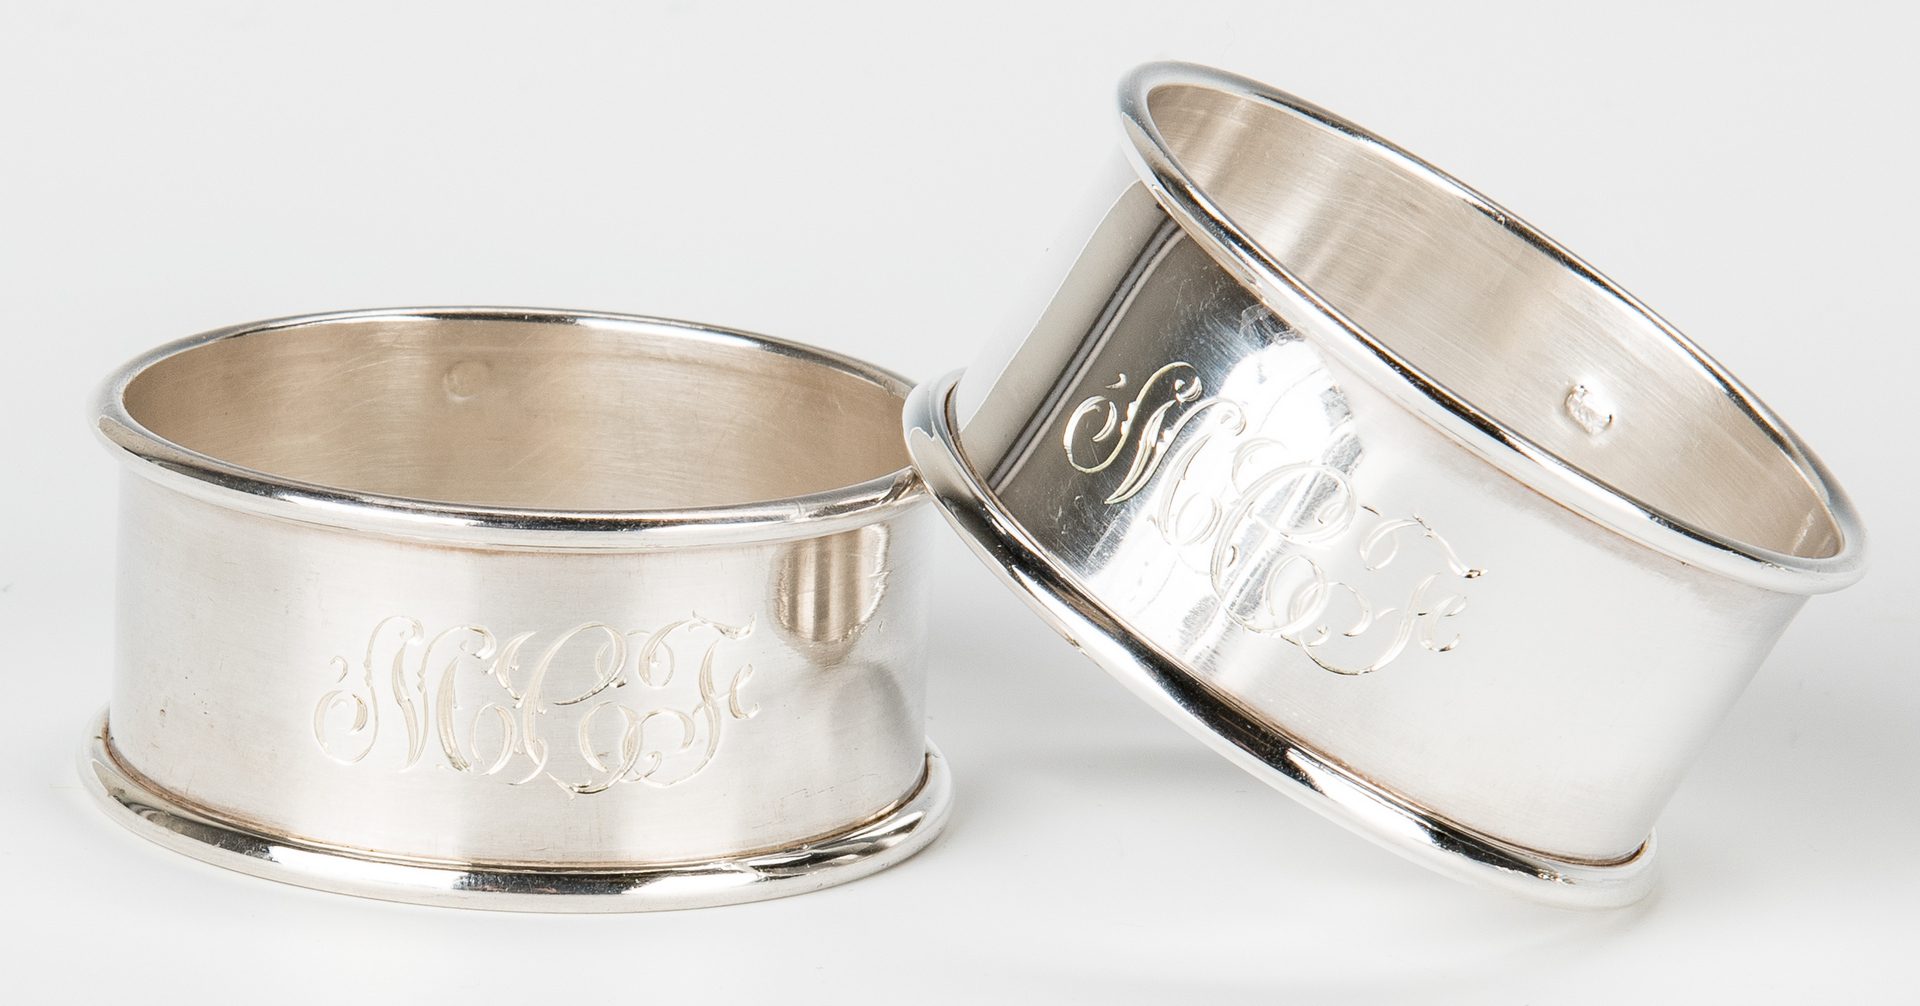 Lot 854: Assembled Group 31 Napkin Rings, most Sterling